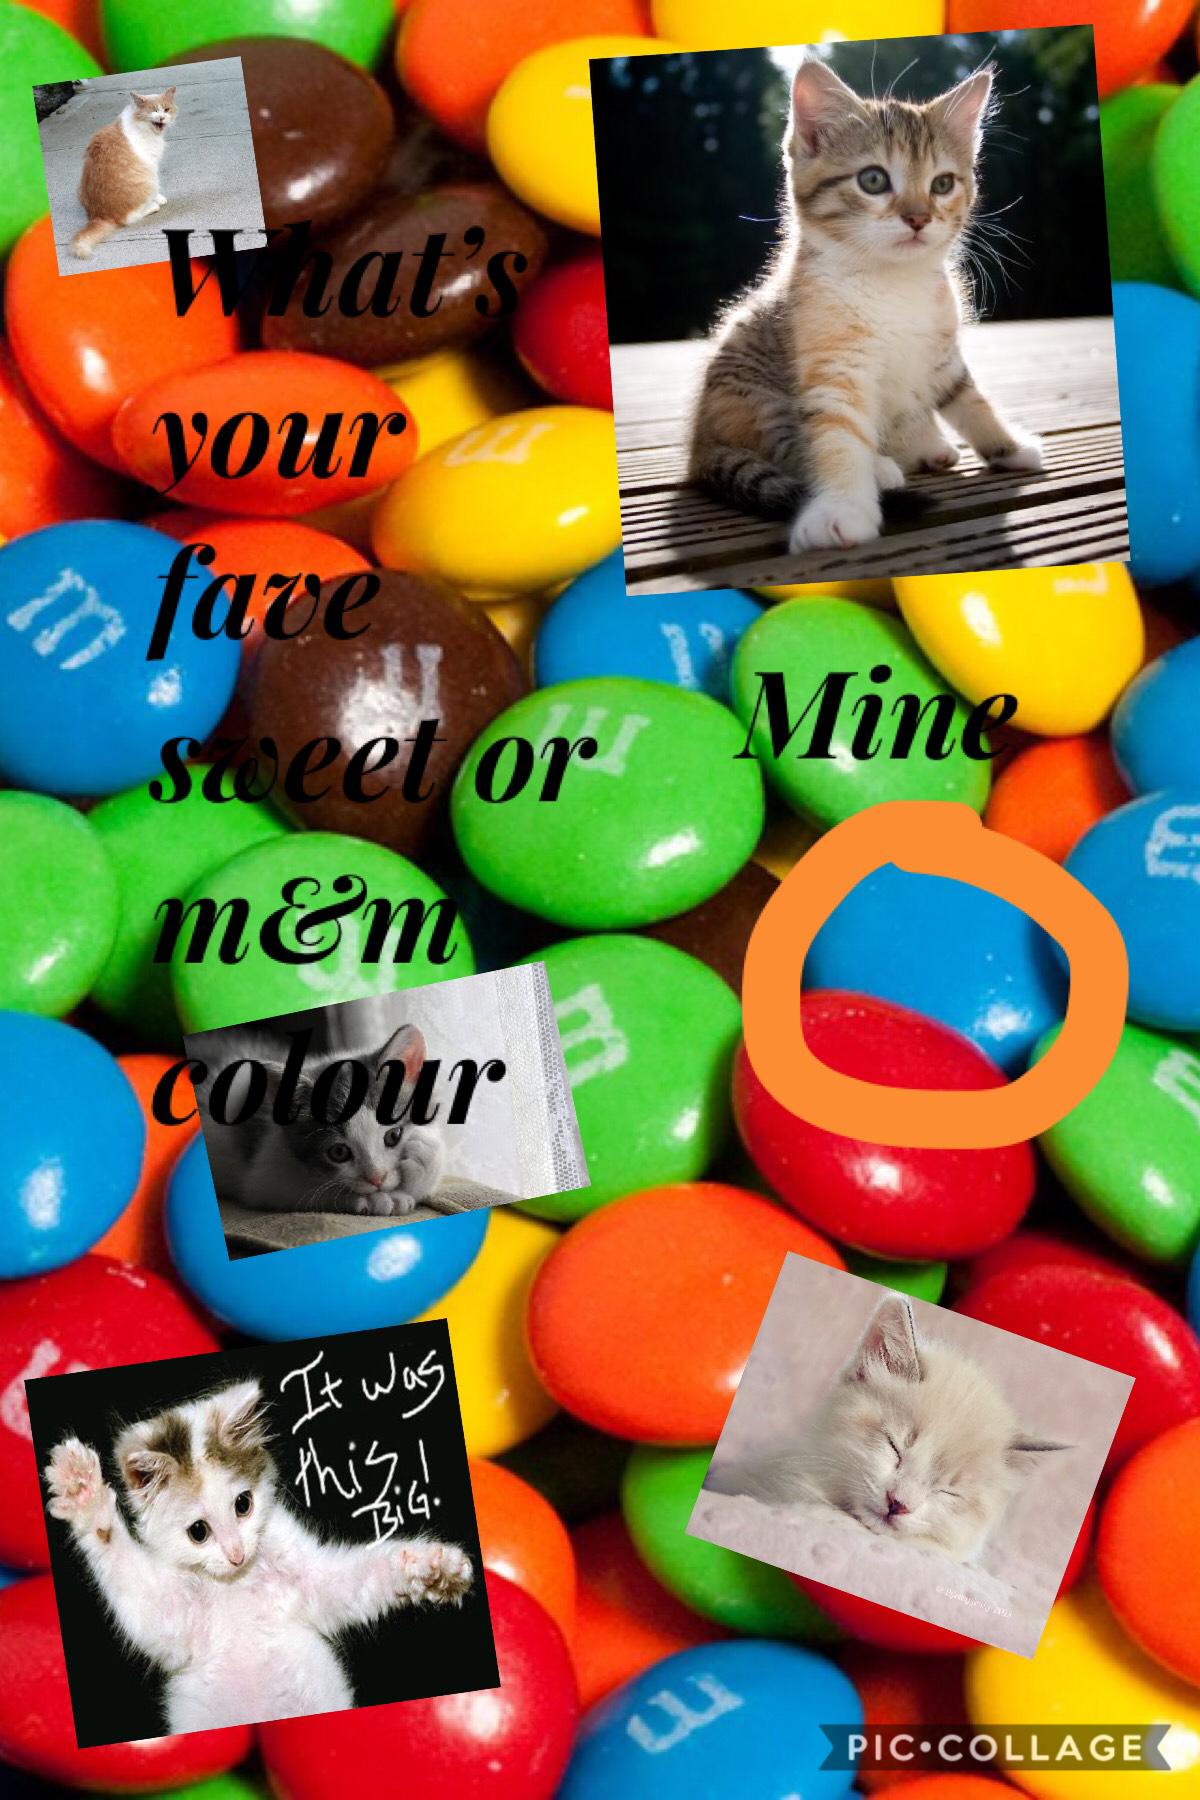 So random that I put kitty’s on an m&m background!! 